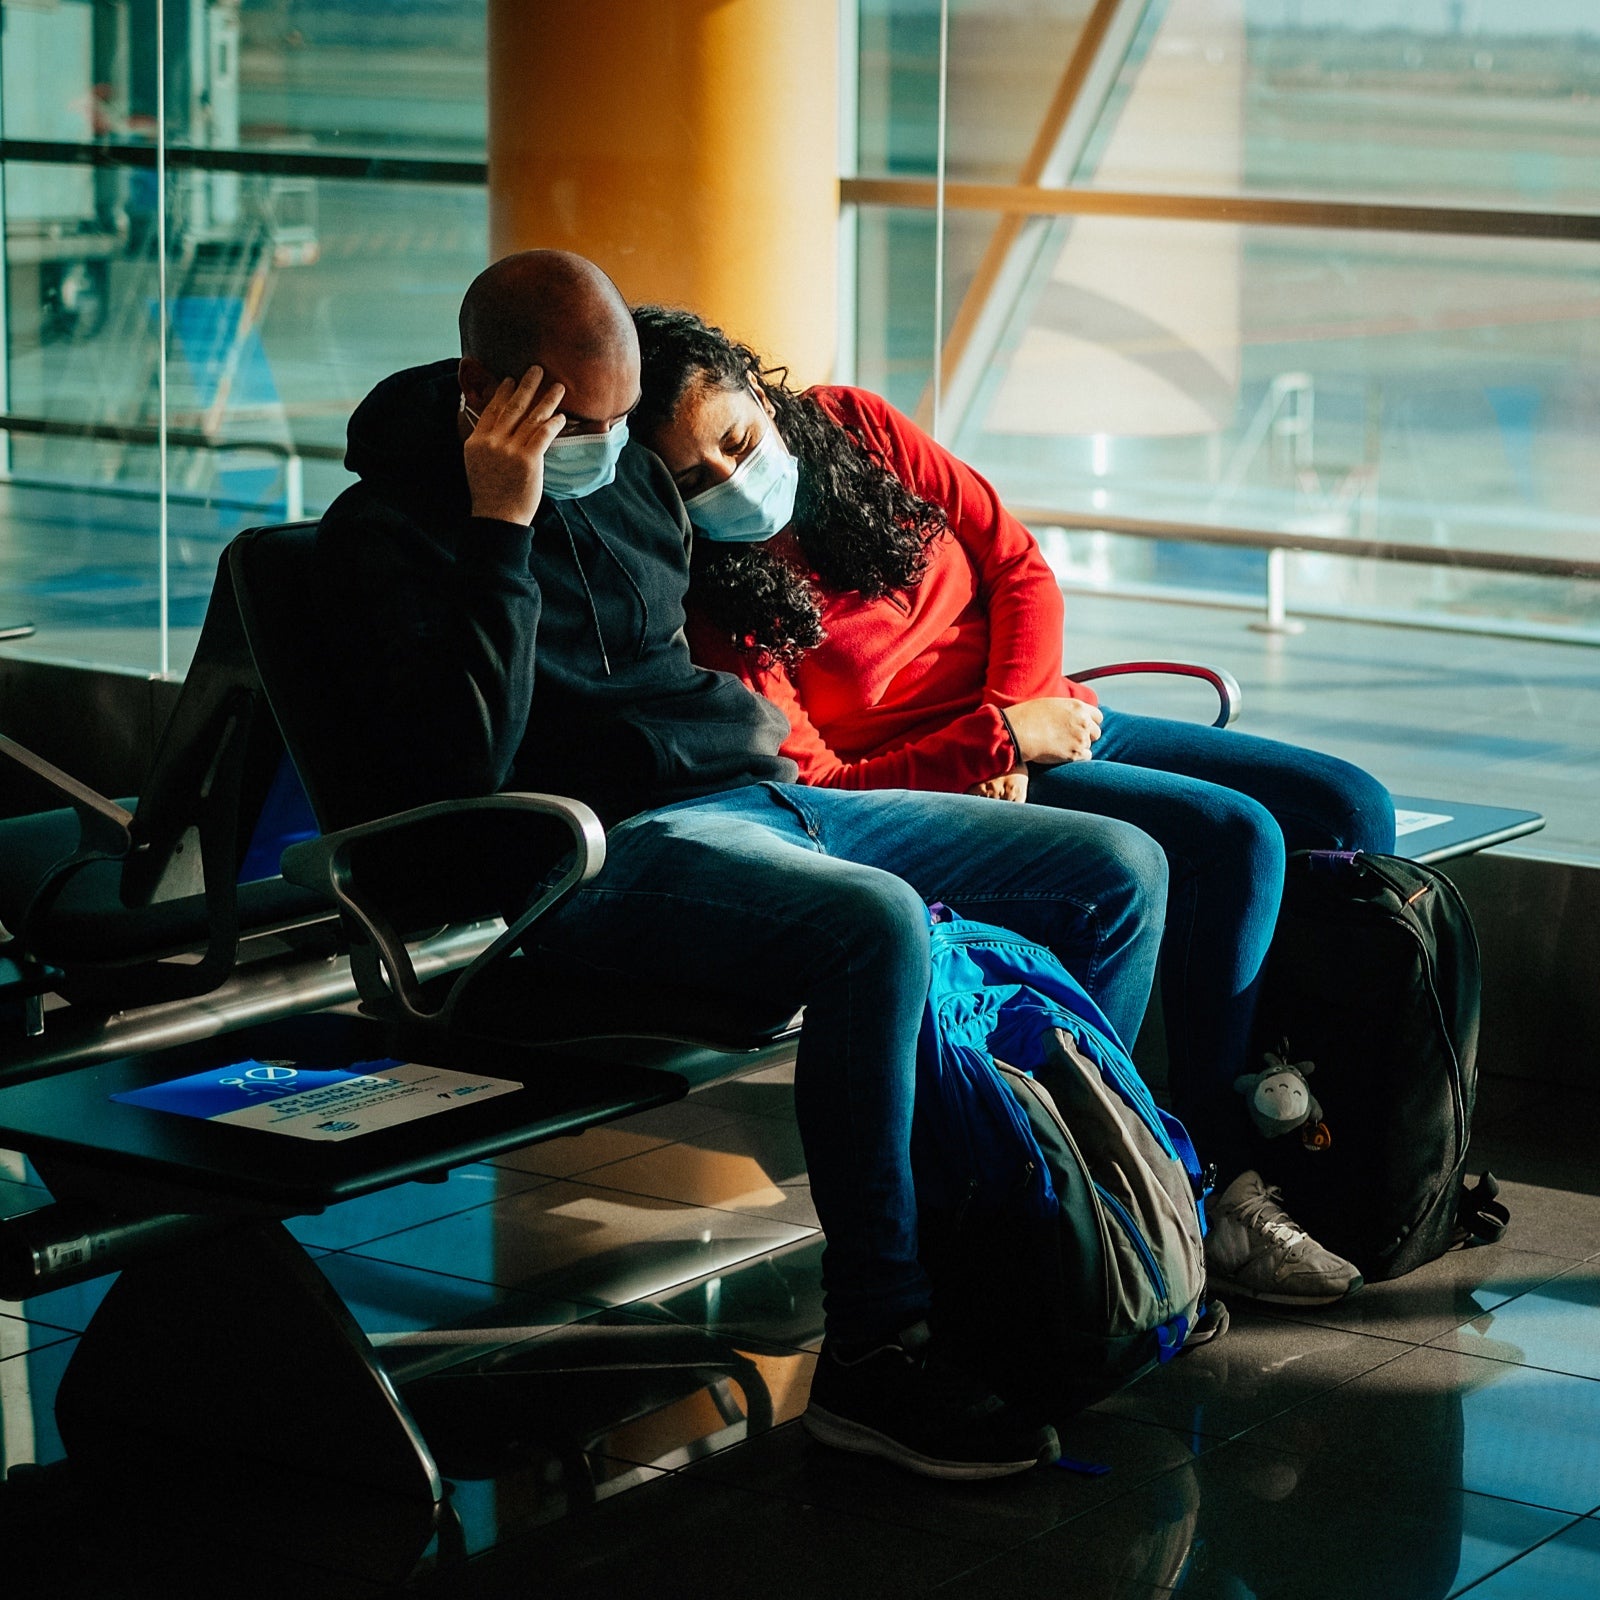 A tired couple at the airport in Buenos Aires, Argentina